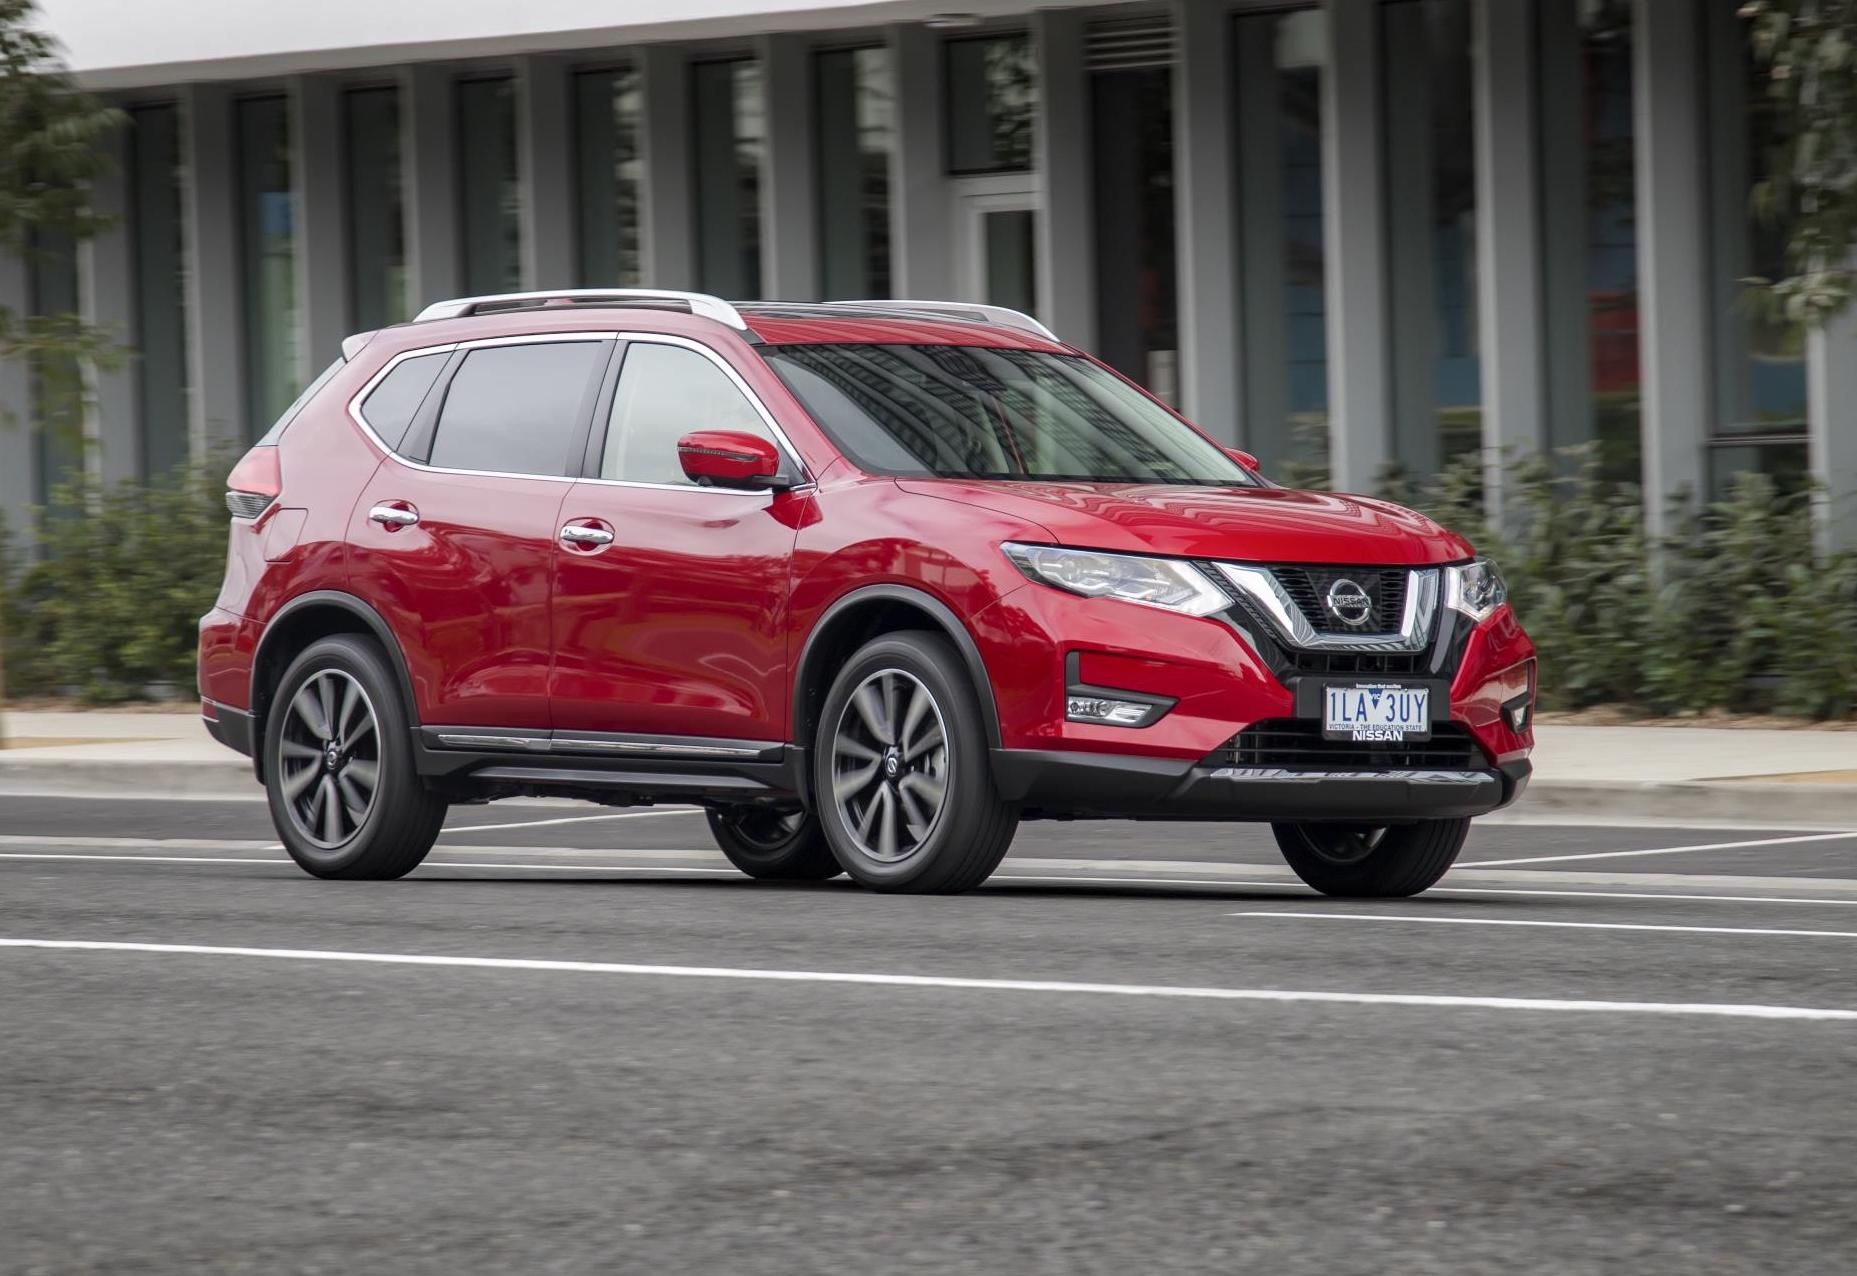 Nissan X-Trail was best-selling SUV in the world in 2017